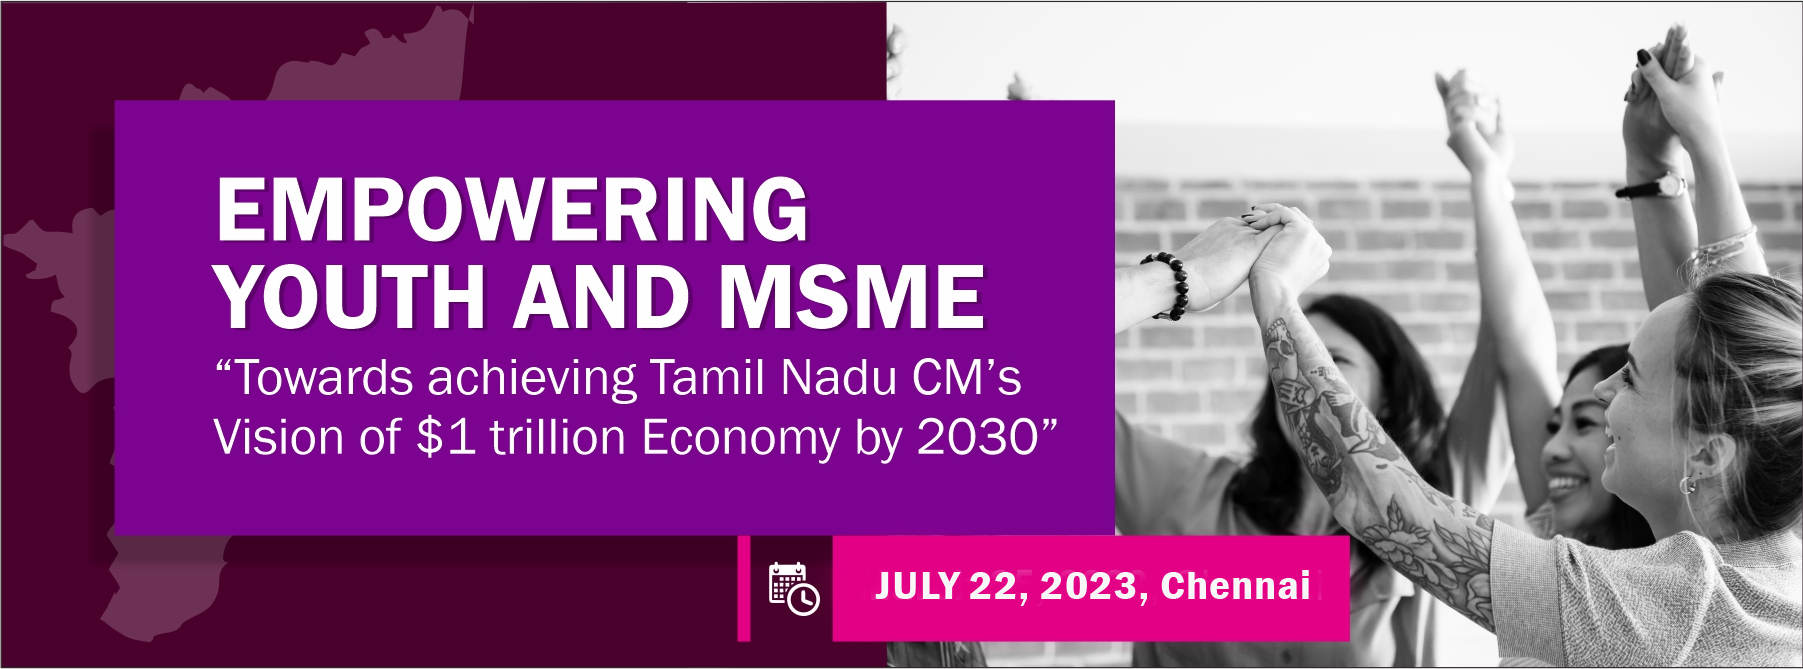 Empowering Youth and Promoting Entrepreneurship and supporting MSMEs:   Towards achieving Tamil Nadu CM’s vision of $1 trillion economy by 2030